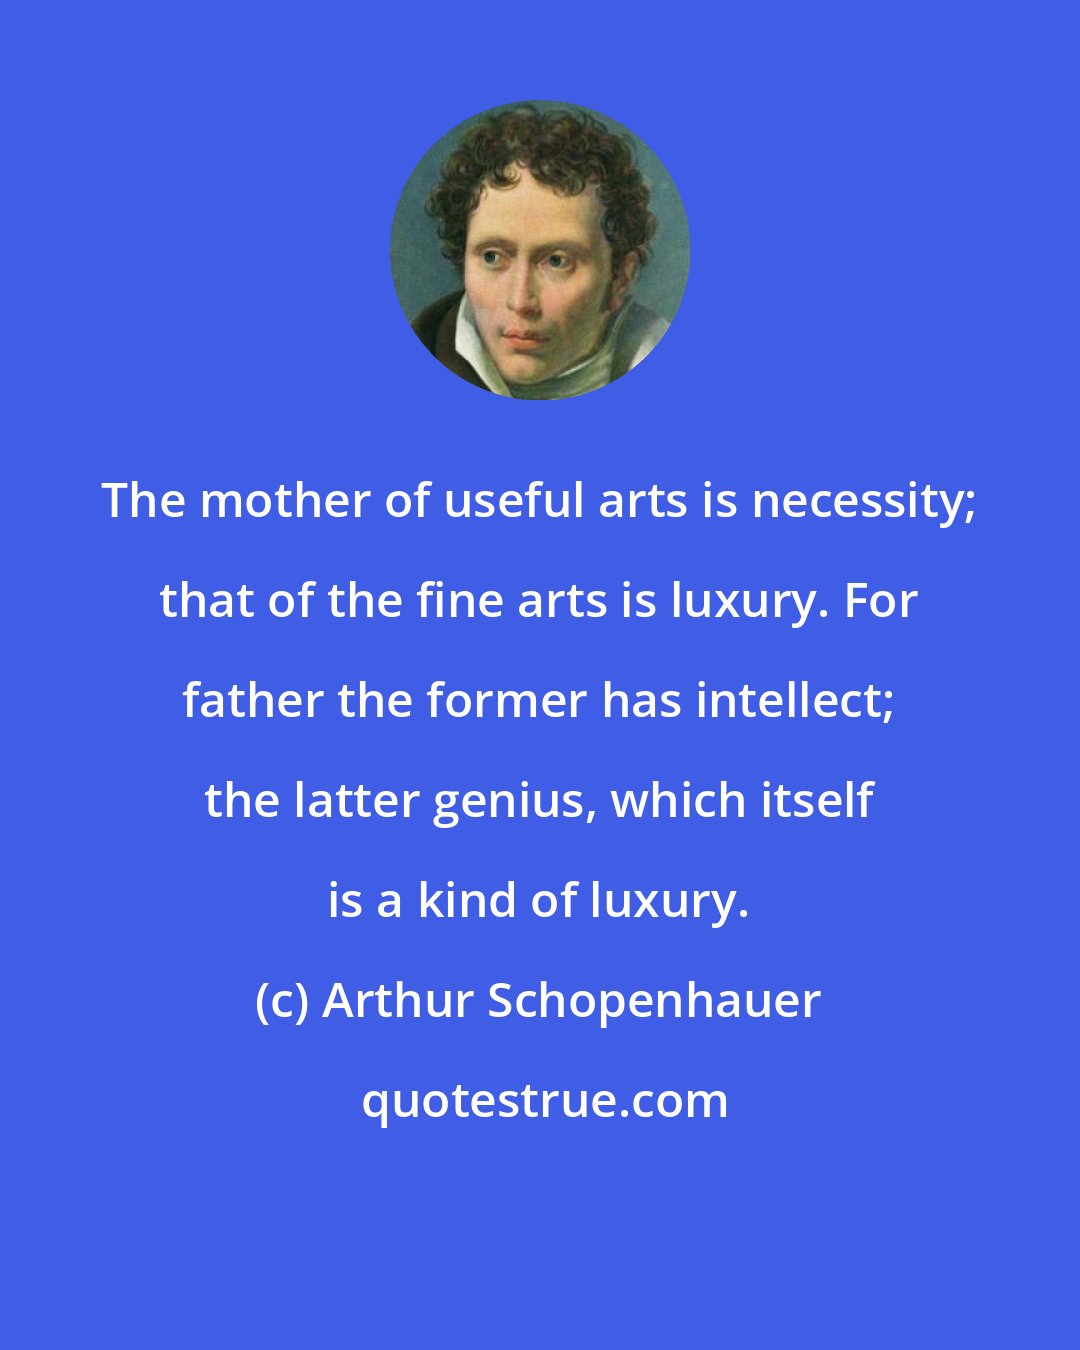 Arthur Schopenhauer: The mother of useful arts is necessity; that of the fine arts is luxury. For father the former has intellect; the latter genius, which itself is a kind of luxury.